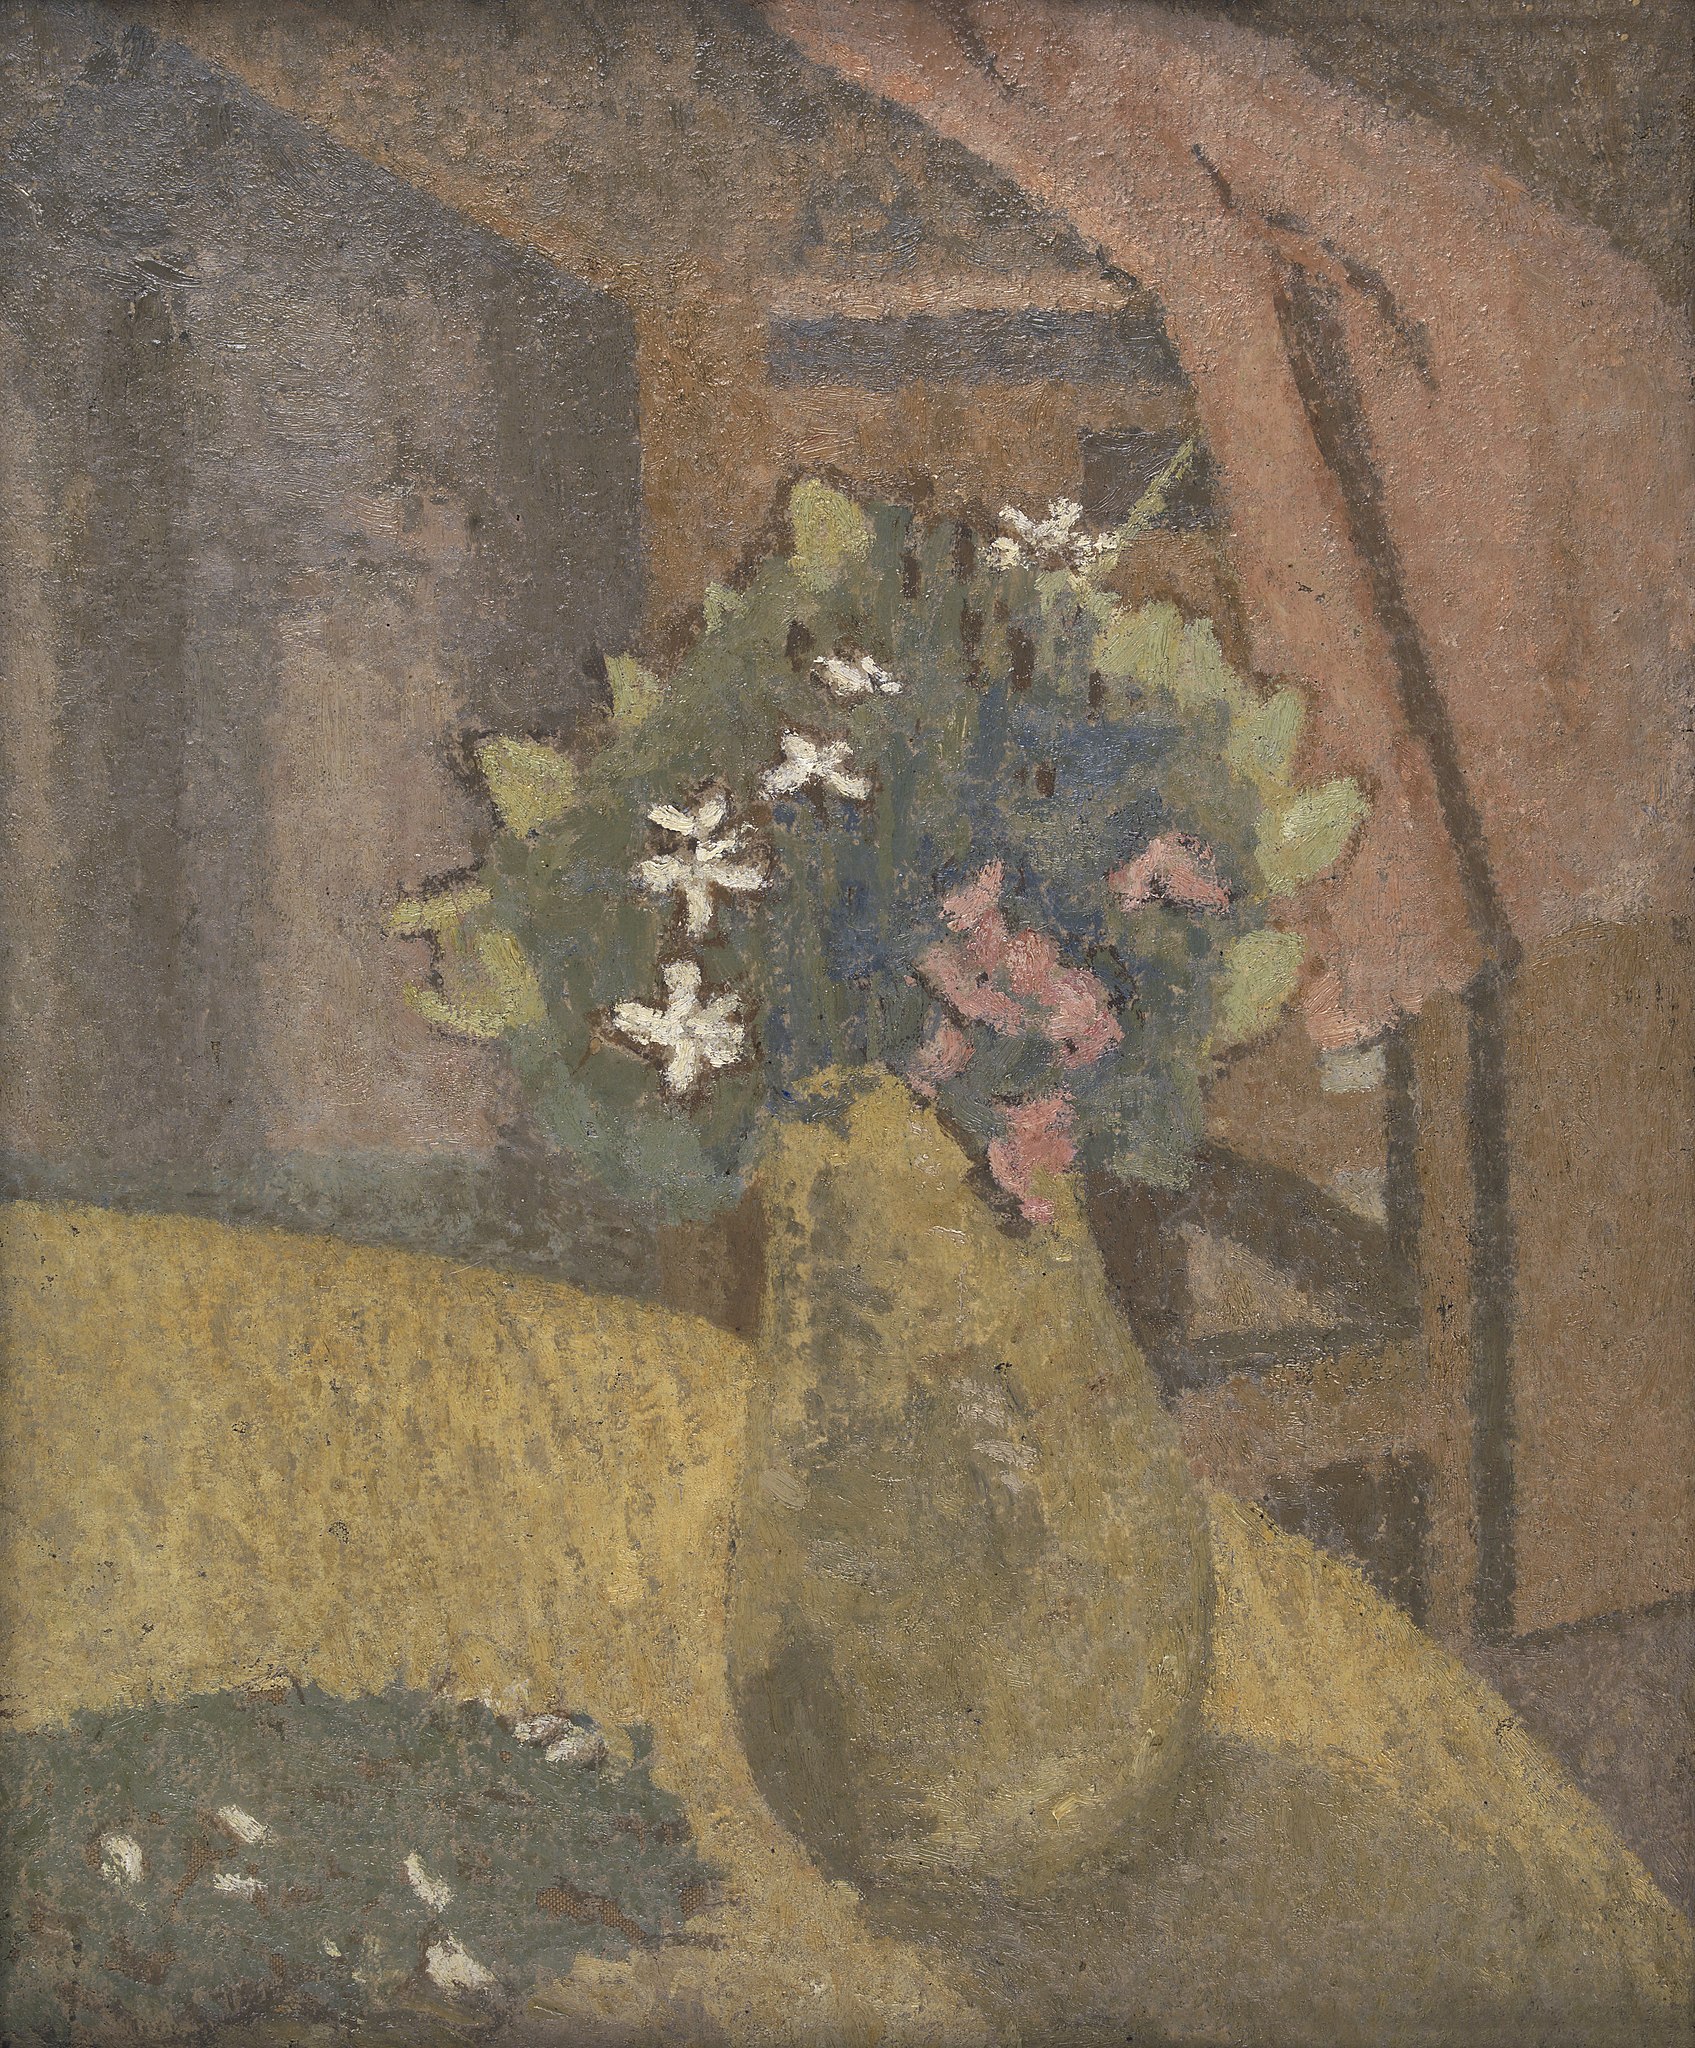 Vase of Flowers by Gwen John - 1910s - 40 x 32 cm National Library of Wales